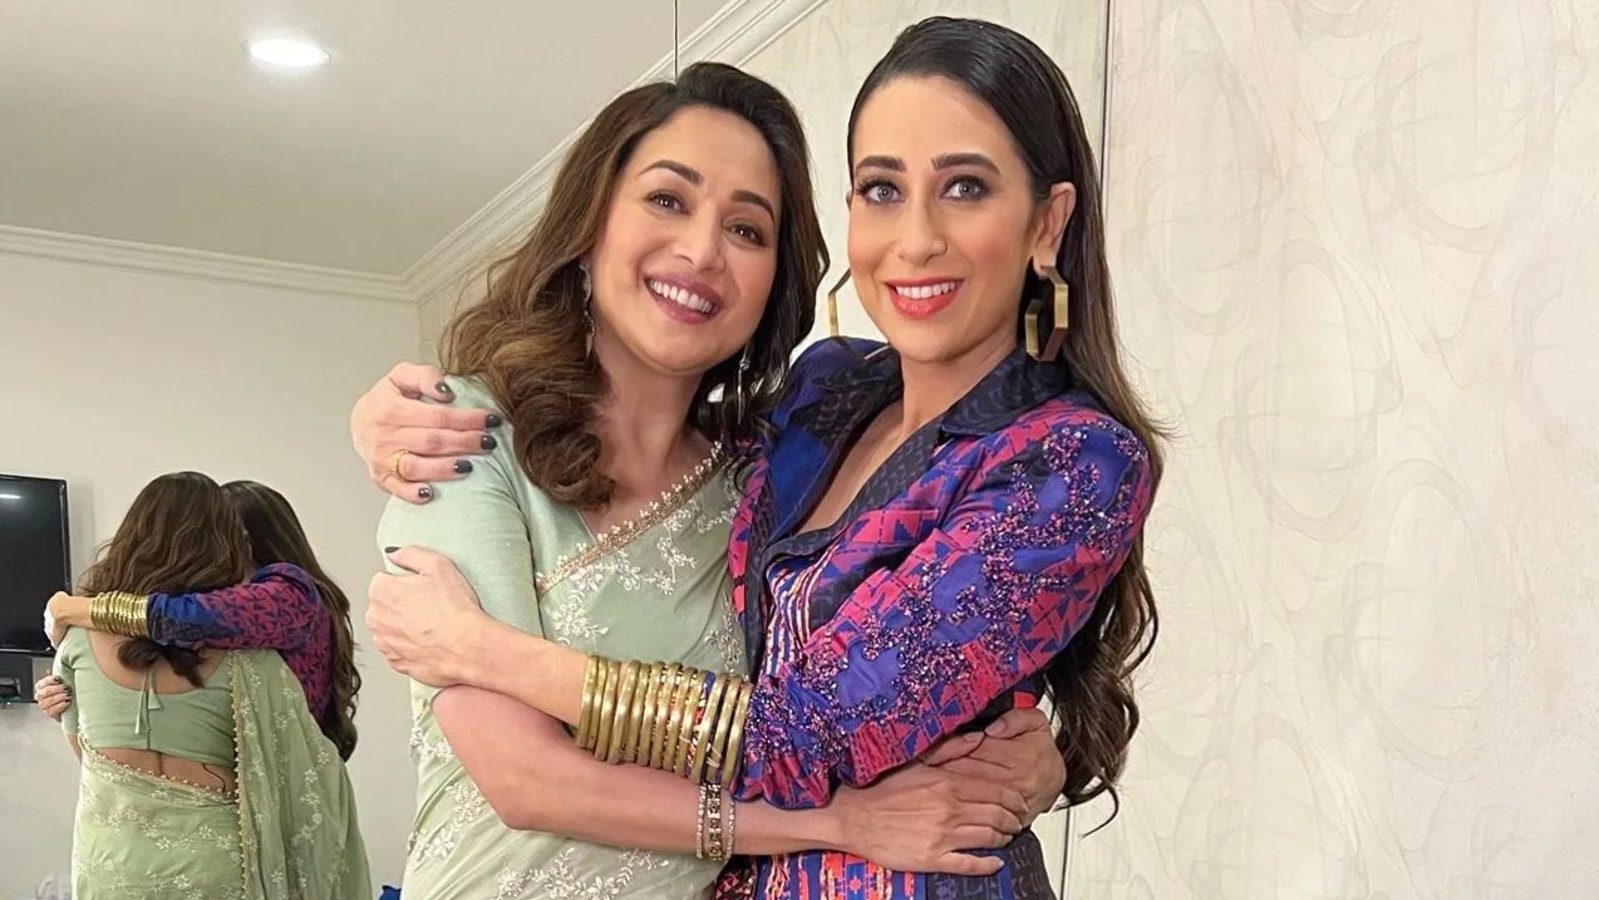 Www Karisma Kapoor Xnxx - Madhuri-Karisma pose together in new pic, fans 'getting Dil To Pagal Hai  vibes' | Bollywood - Hindustan Times